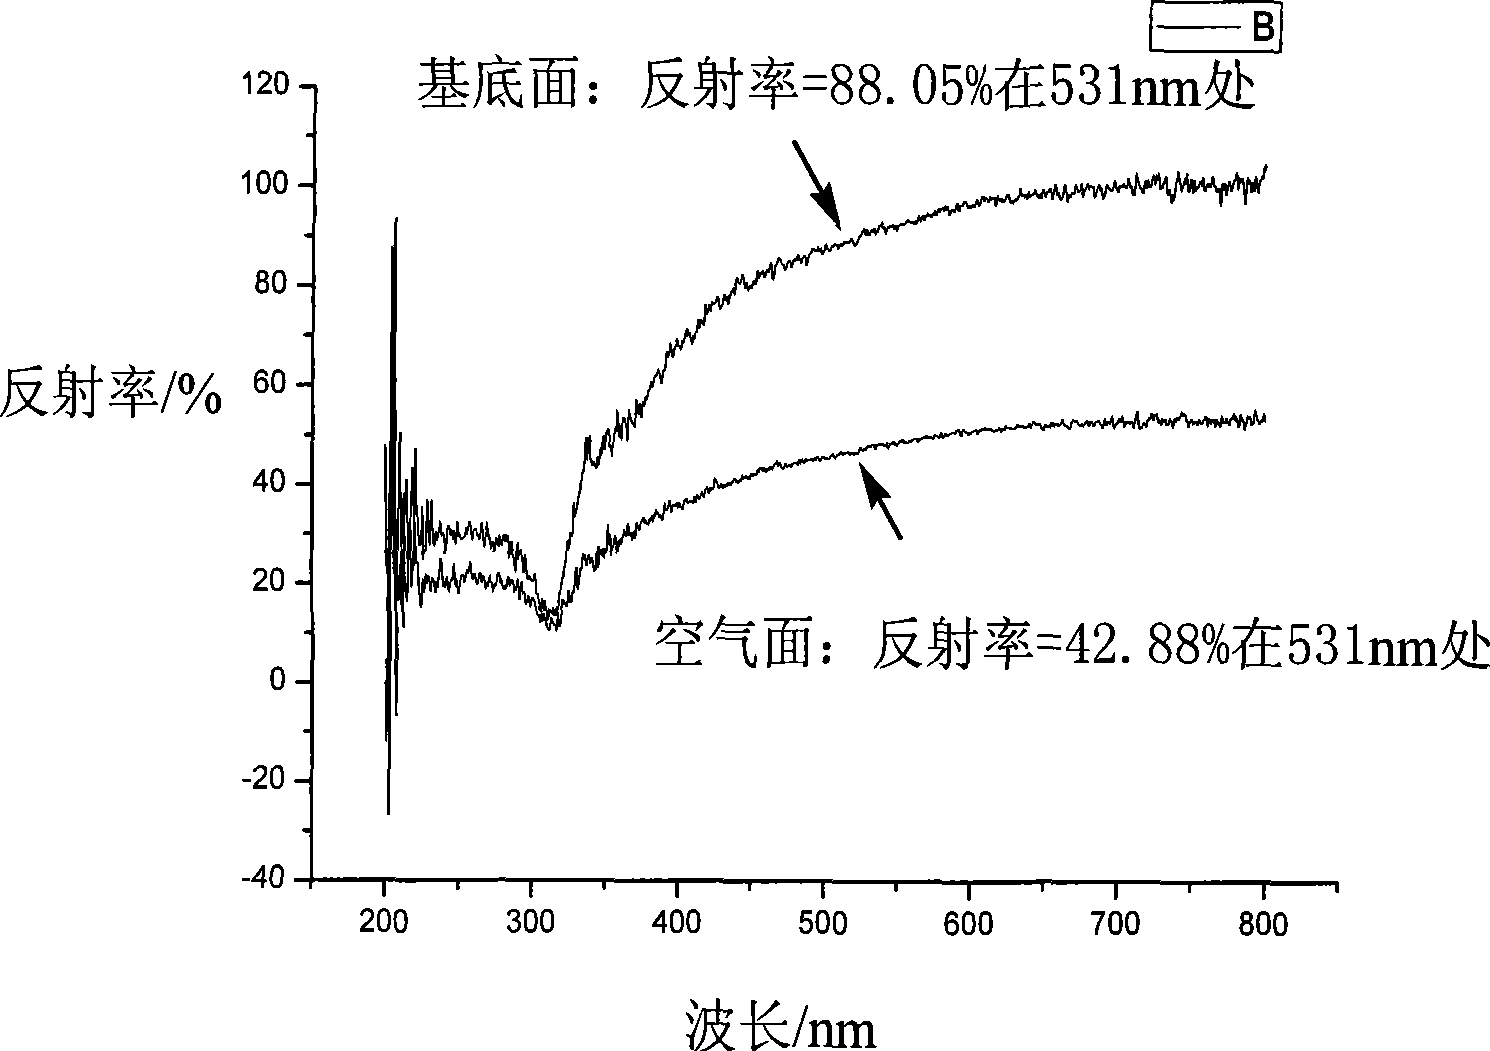 Method for preparing two-sided polyimide / silver compound film